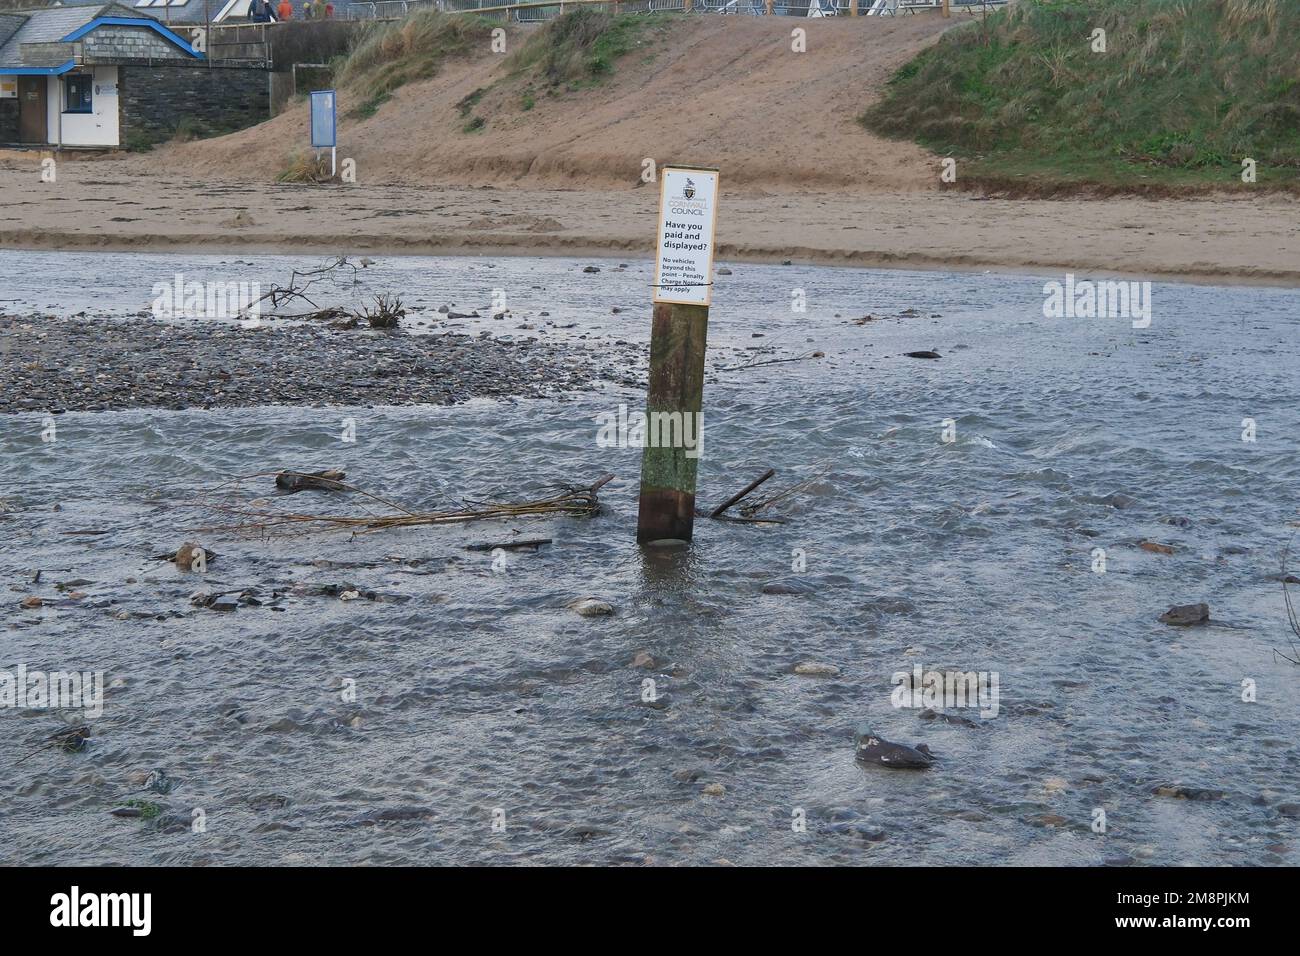 Polzeath, Cornwall, UK. 15th January 2023. Uk Weather. The council run car park next to the beach at Polzeath is starting to be washed away as the small stream that drains into the sea has swollen due to the relentless rainfall. The posts mark the recommended parking area. Credit SImon Maycock / Alamy Live News. Stock Photo